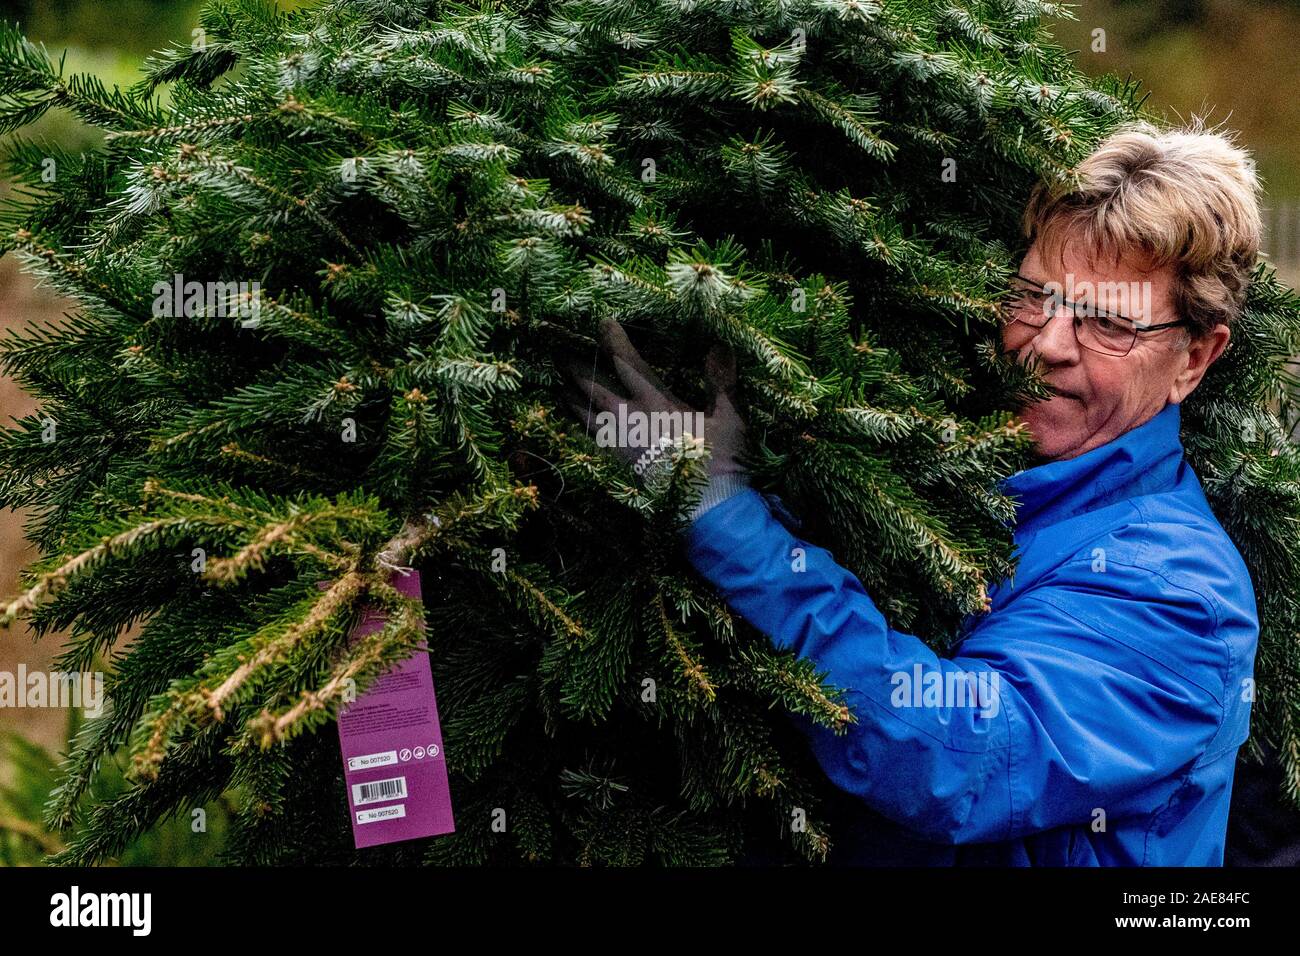 Voorschoten, Netherlands. 07th Dec, 2019. VOORSCHOTEN, Landgoed Duivenvoorde, 07-12-2019, The fresher your Christmas tree, the longer your Christmas tree stays beautiful. And what could be fresher than sawing, cutting or digging out your own Christmas tree? Nowadays you can get into more and more places in the Christmas spirit by selecting your own Christmas tree and by sawing. It is not only a fun family outing but you also give nature a helping hand. Credit: Pro Shots/Alamy Live News Stock Photo